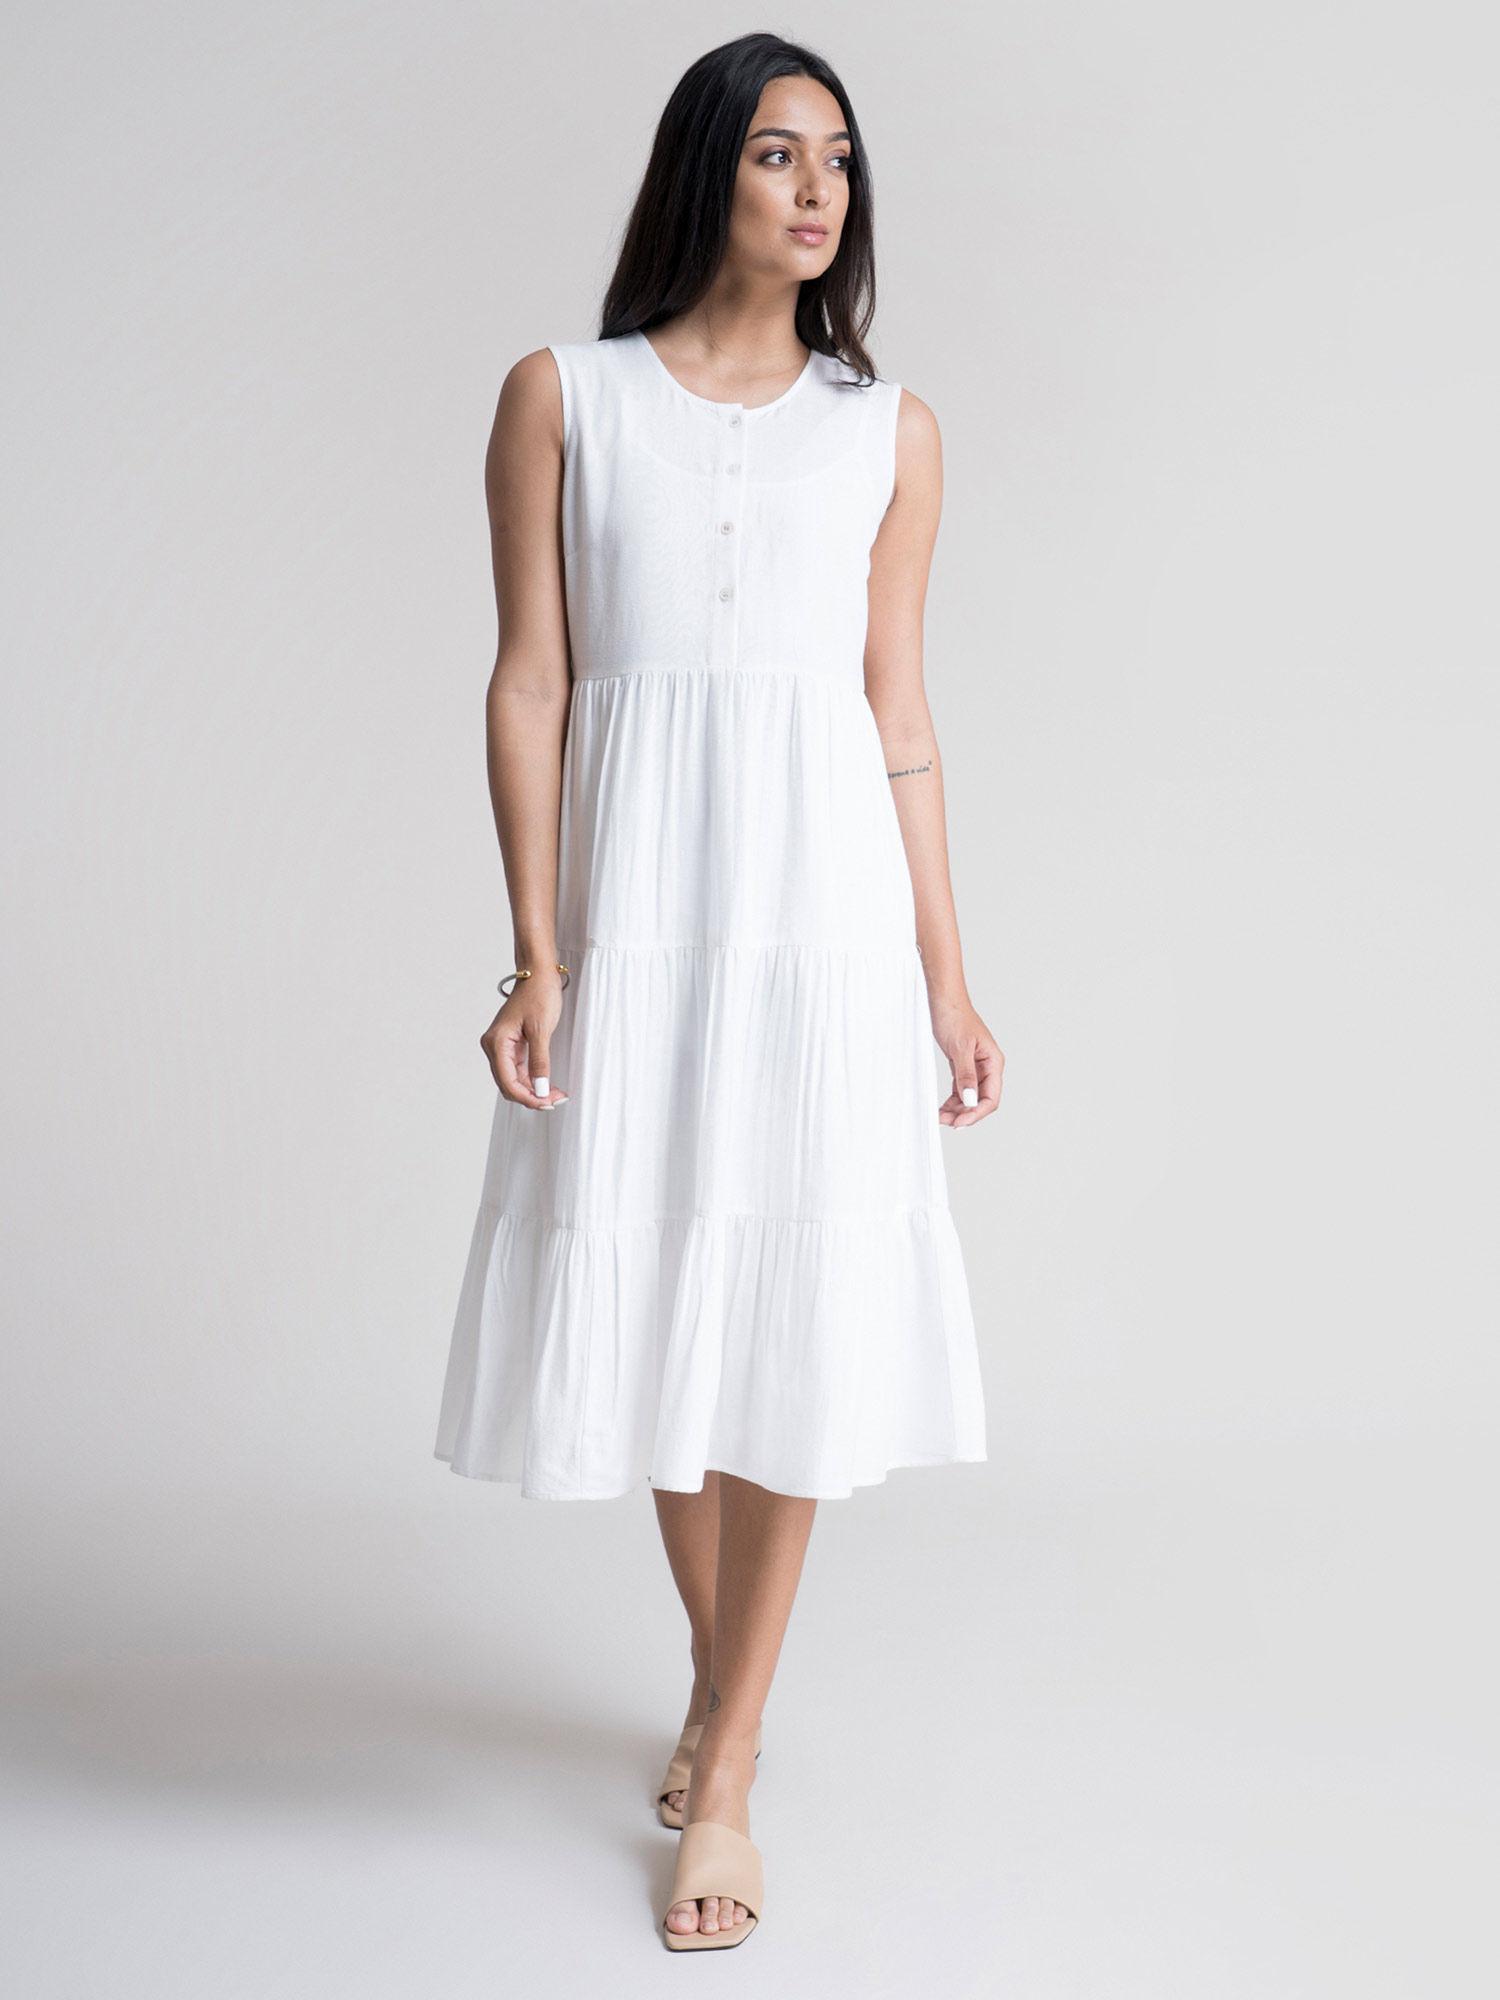 cotton 3 tiered a-line dress - white